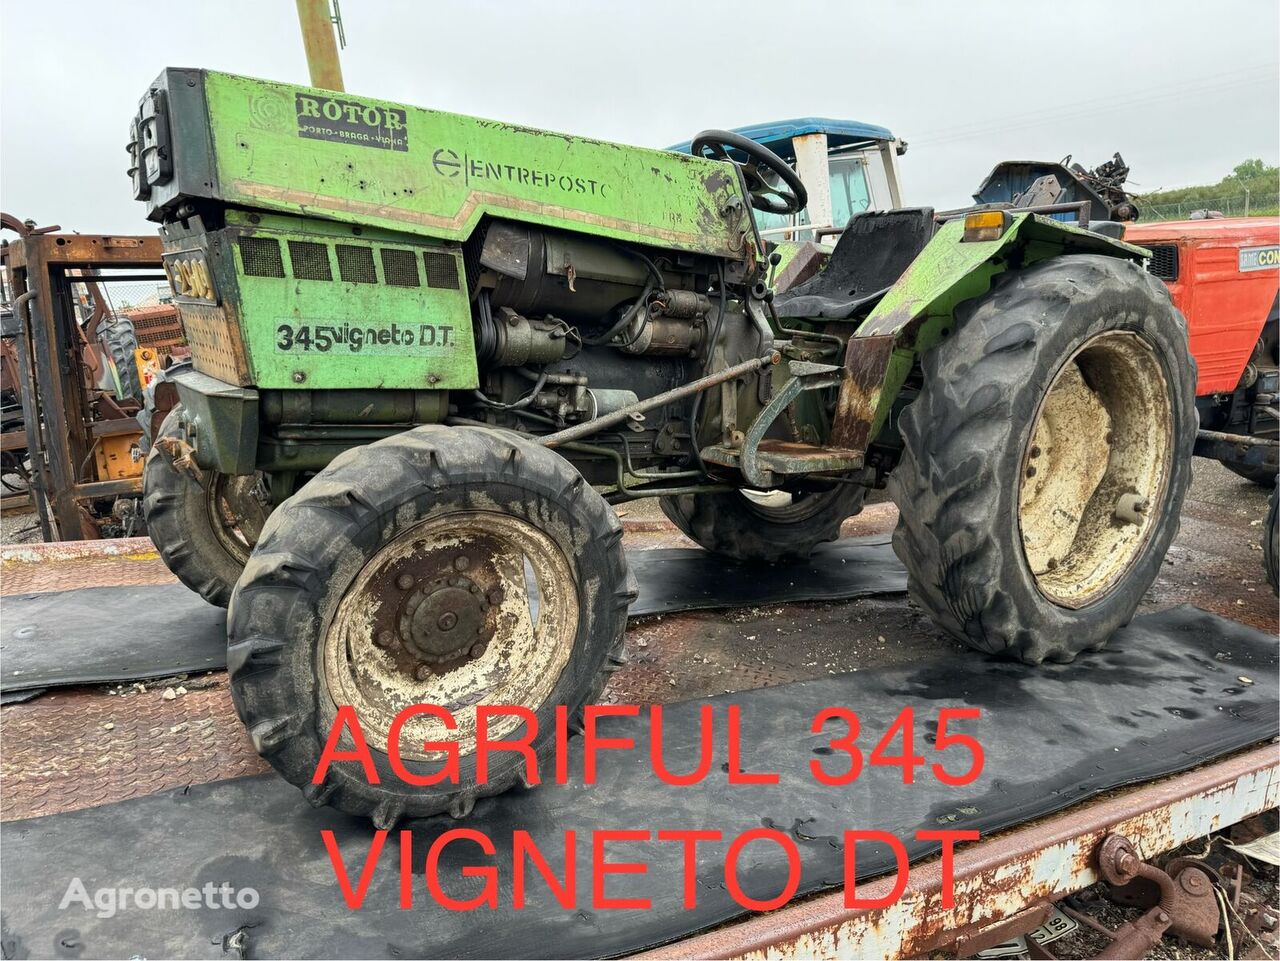 Agrico AGRIFUL 345 VIGNETO DT wheel tractor